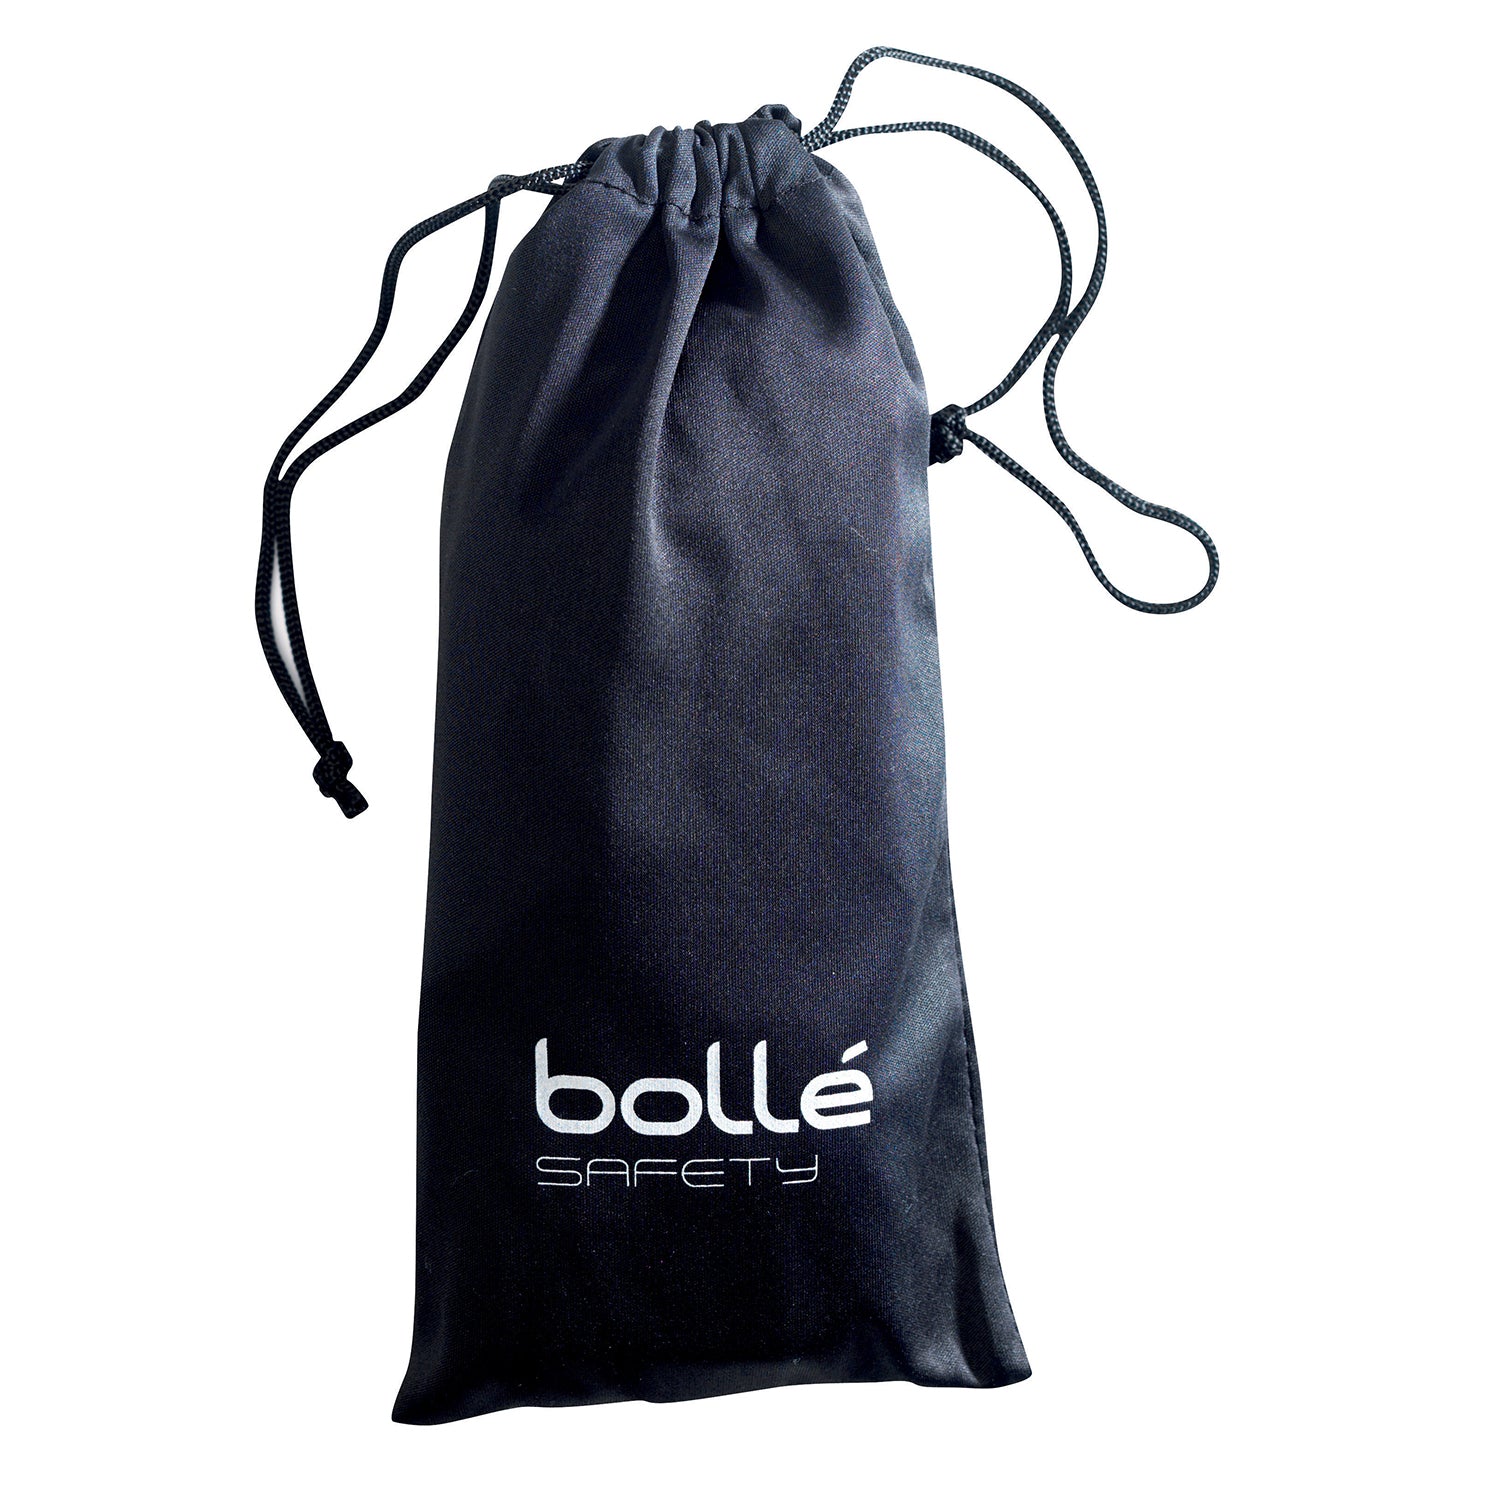 Bolle Safety Spectacle Glasses Microfibre Bag